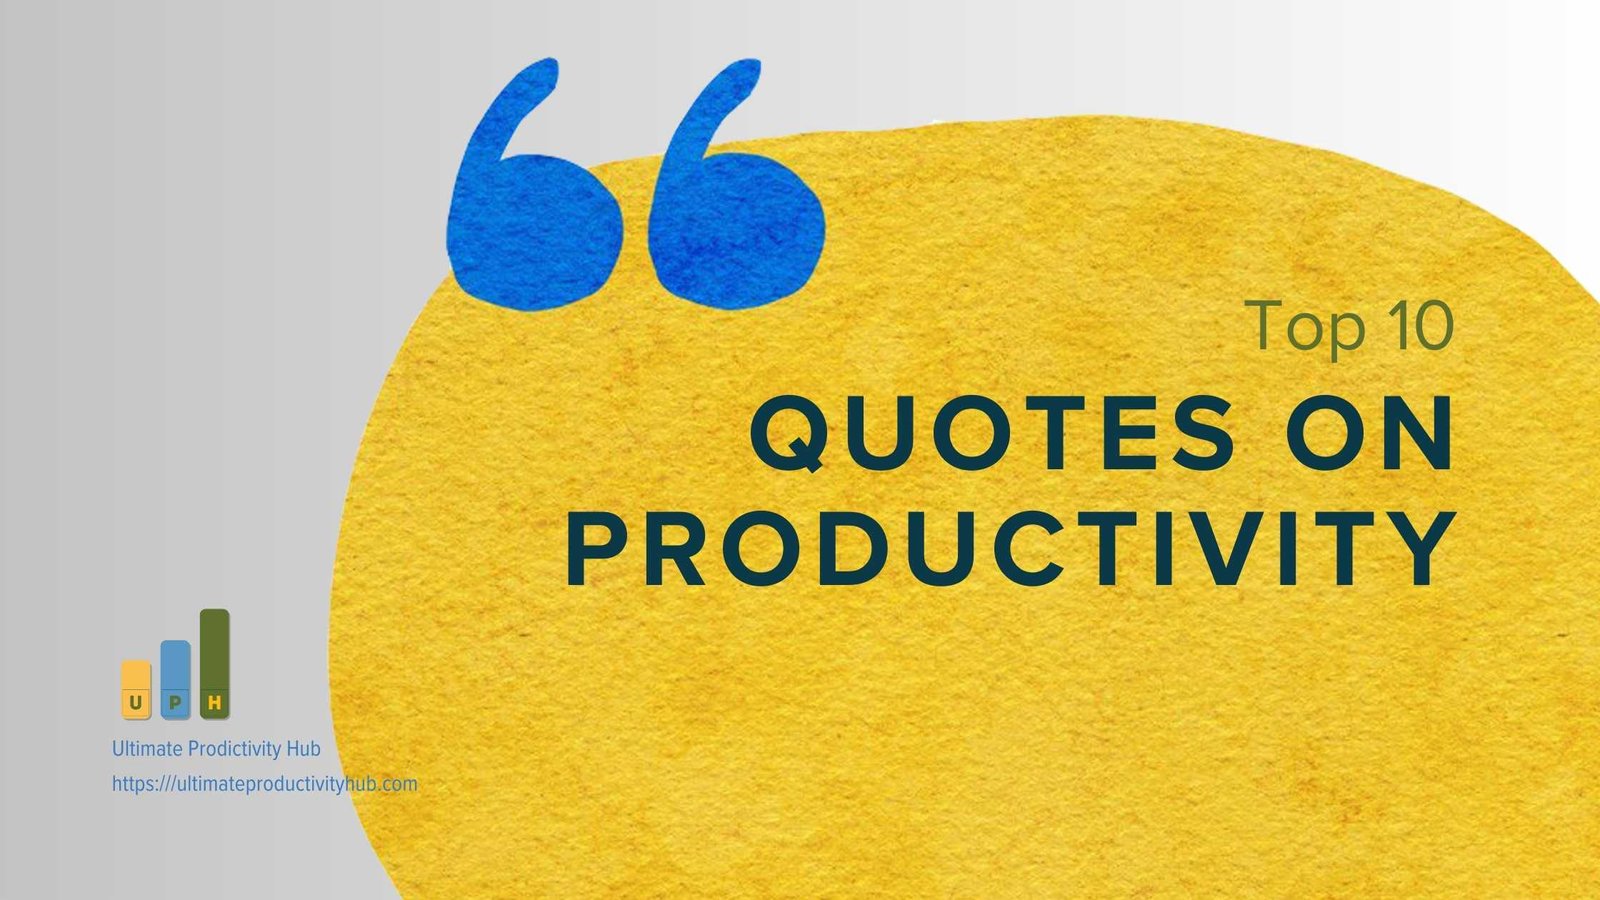 Top 10 Quotes on Productivity